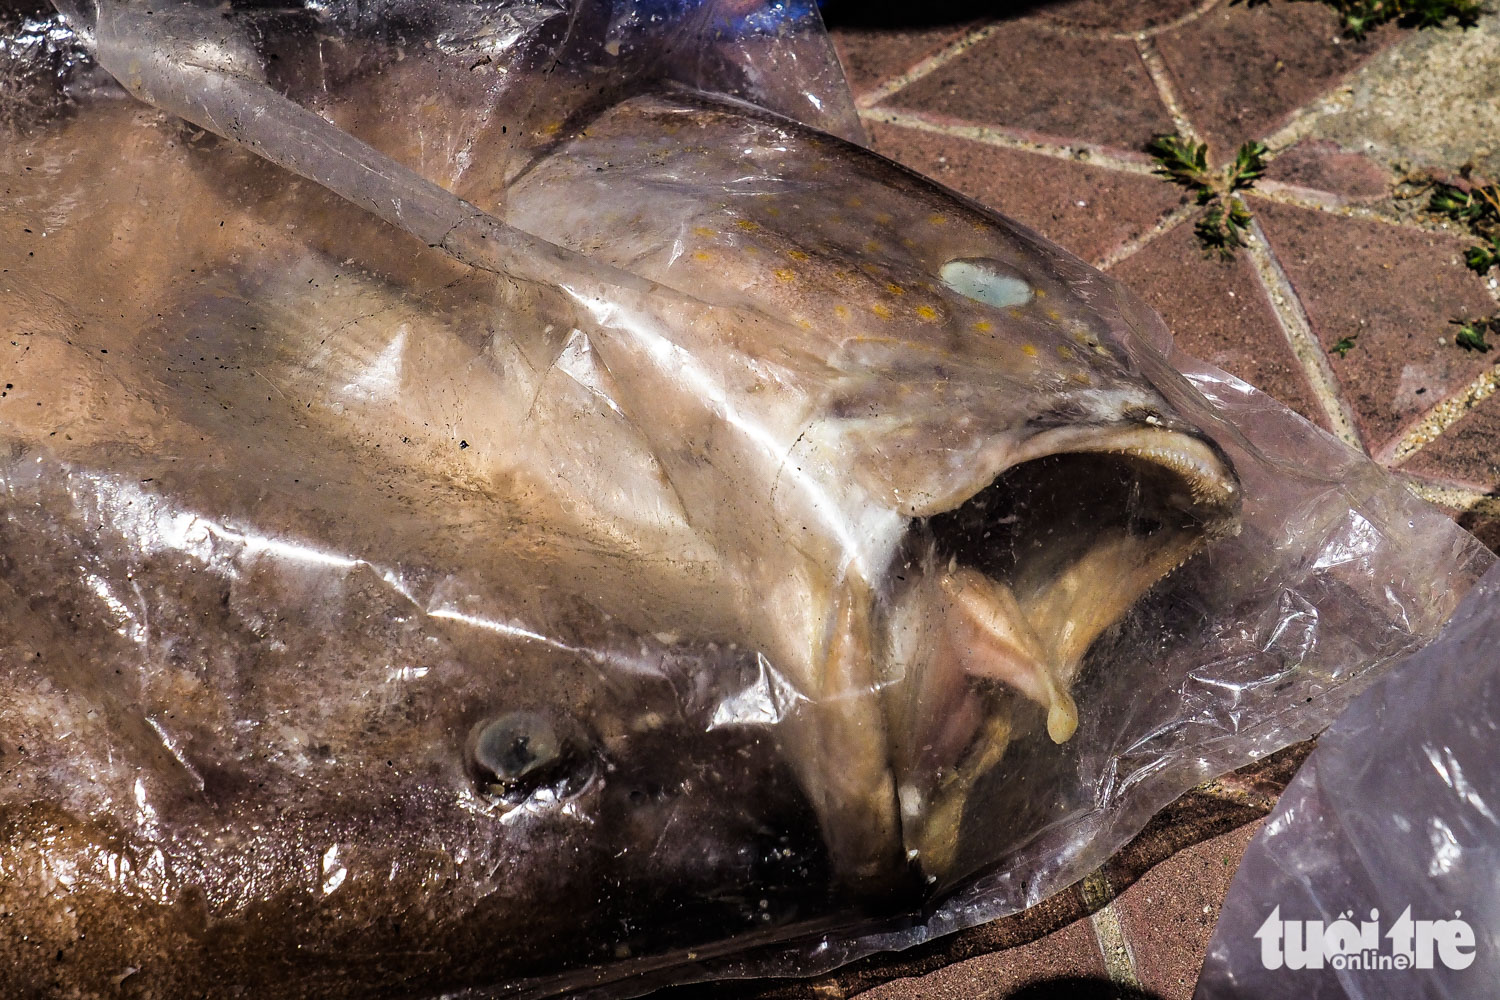 Unusable fish are kept inside thick plastic bags.